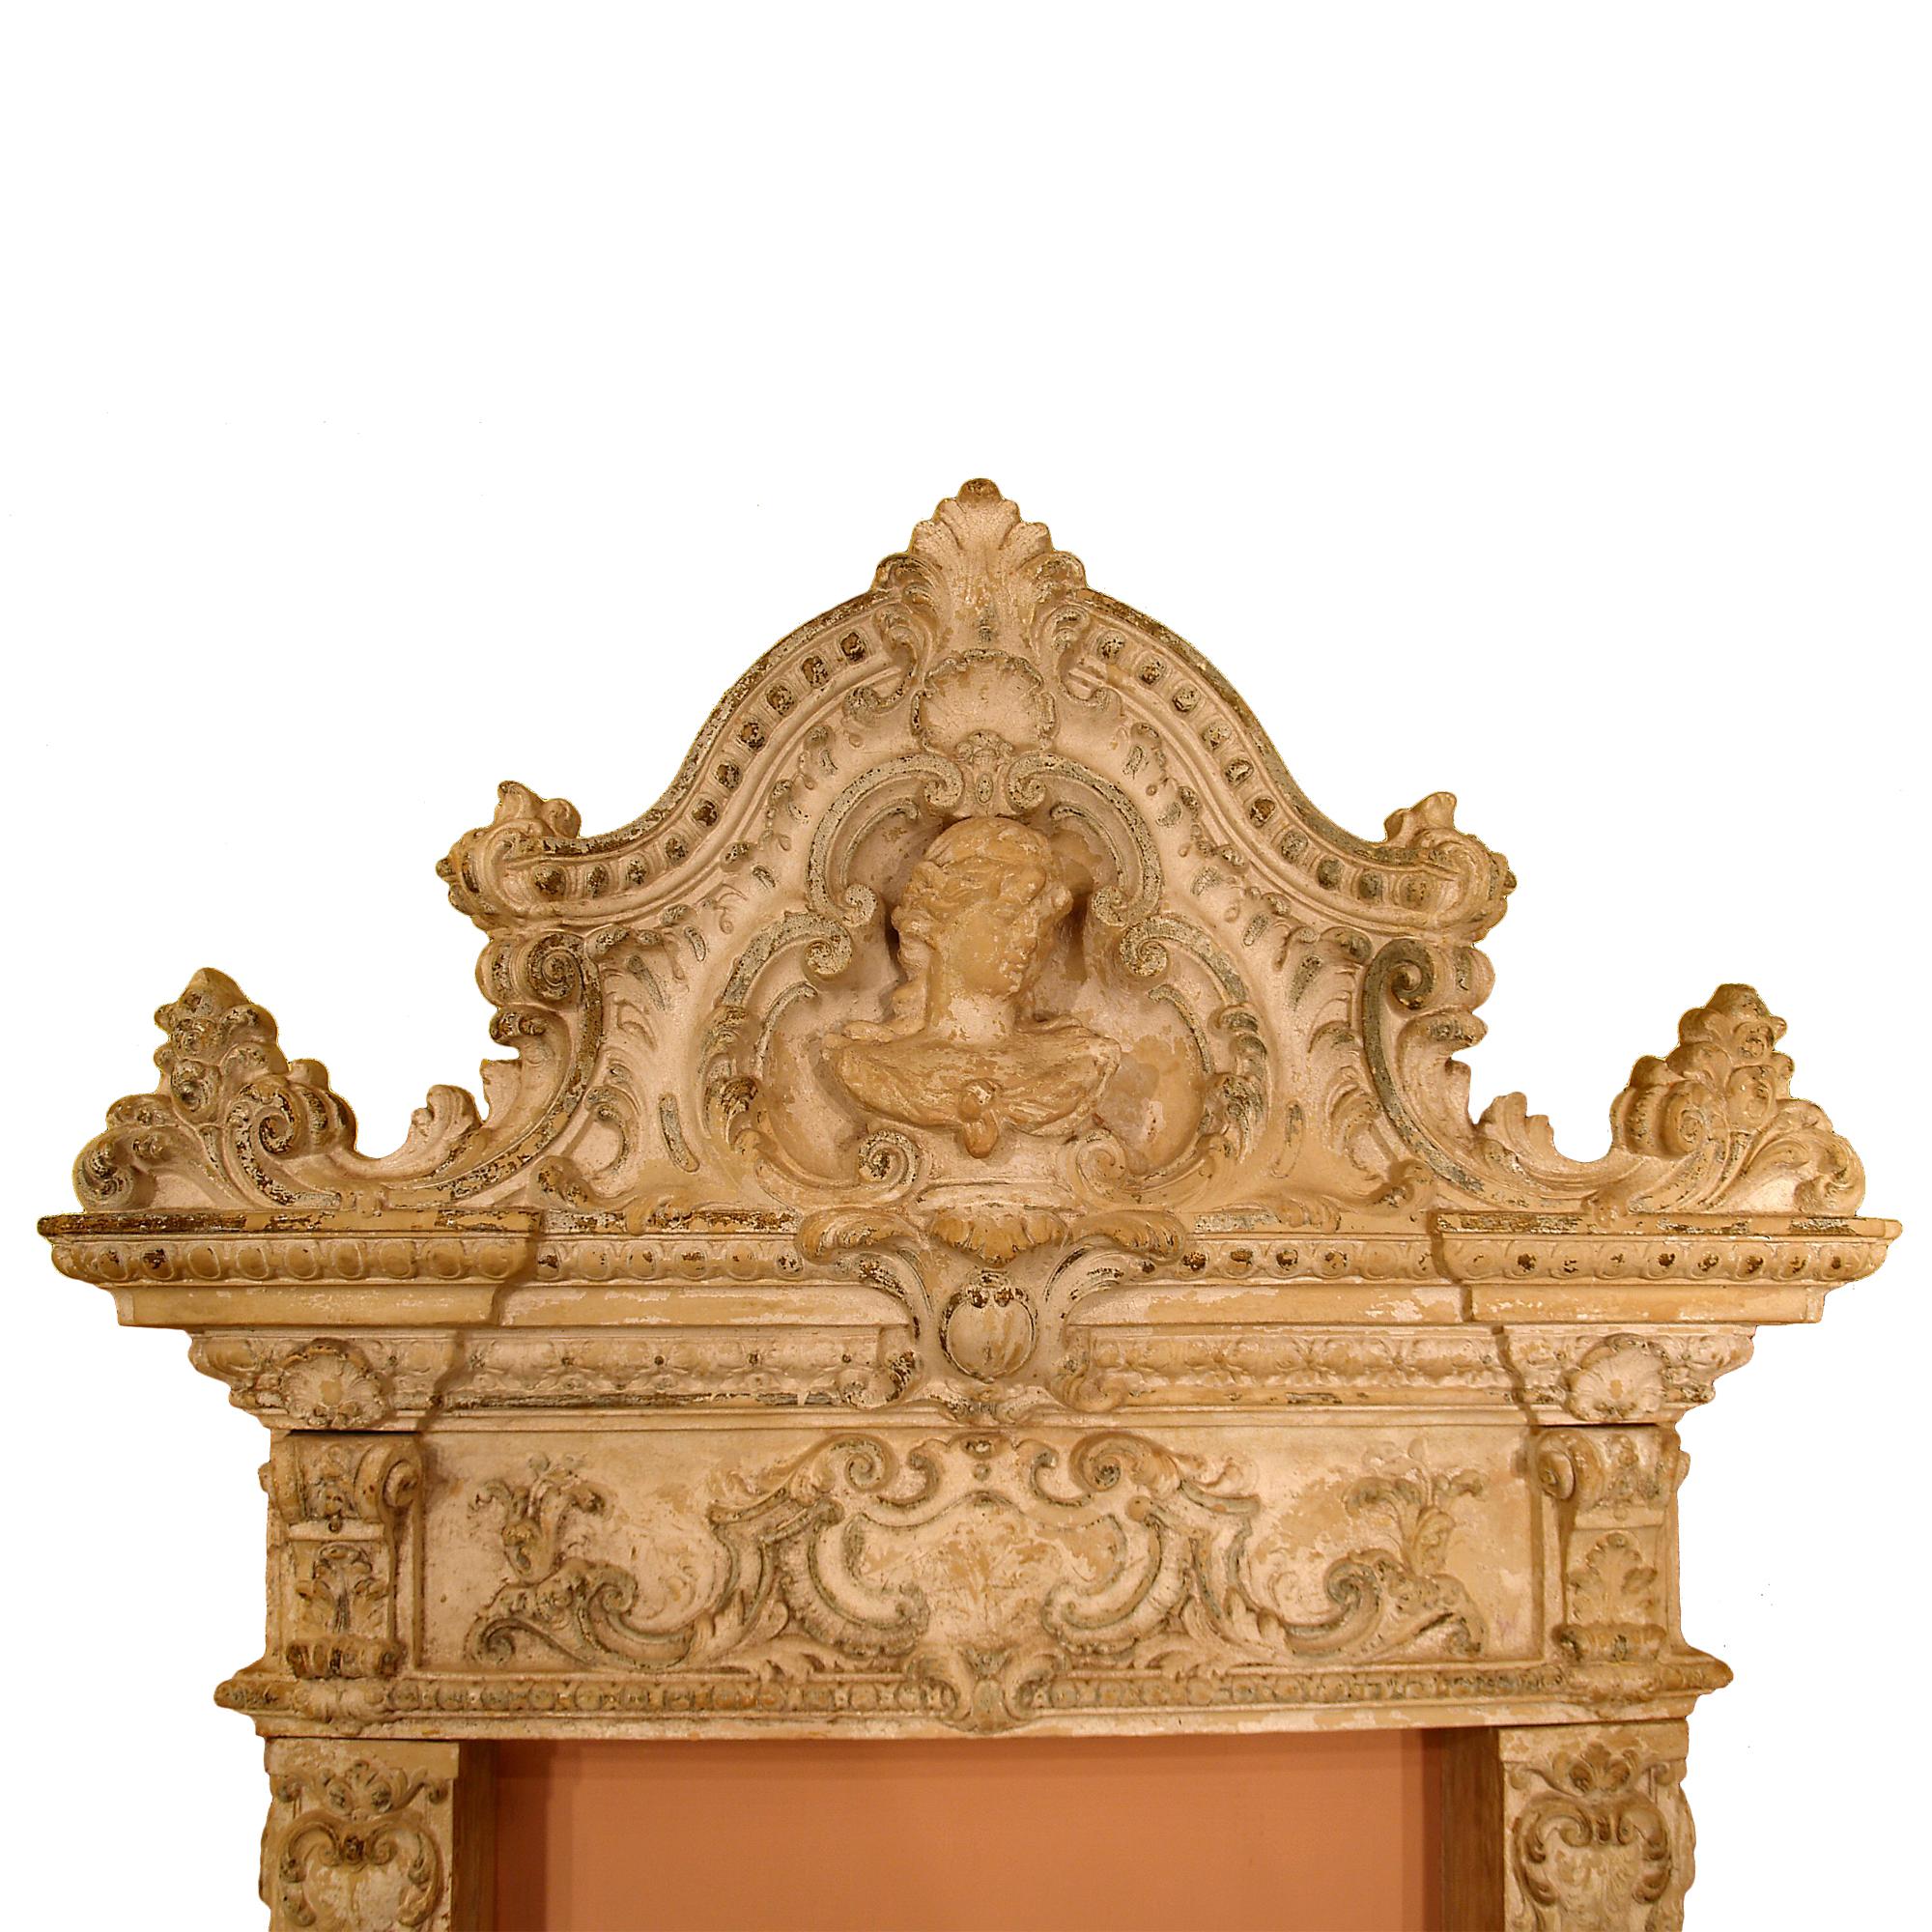 A rare Italian 19th century terra cotta fireplace mantel, from a Château in Sologne, France. The mantel is highly decorated by scrolled acanthus leaves, shells, flowers and central crests. Charming cherubs faces at the bottom. Impressive top crown